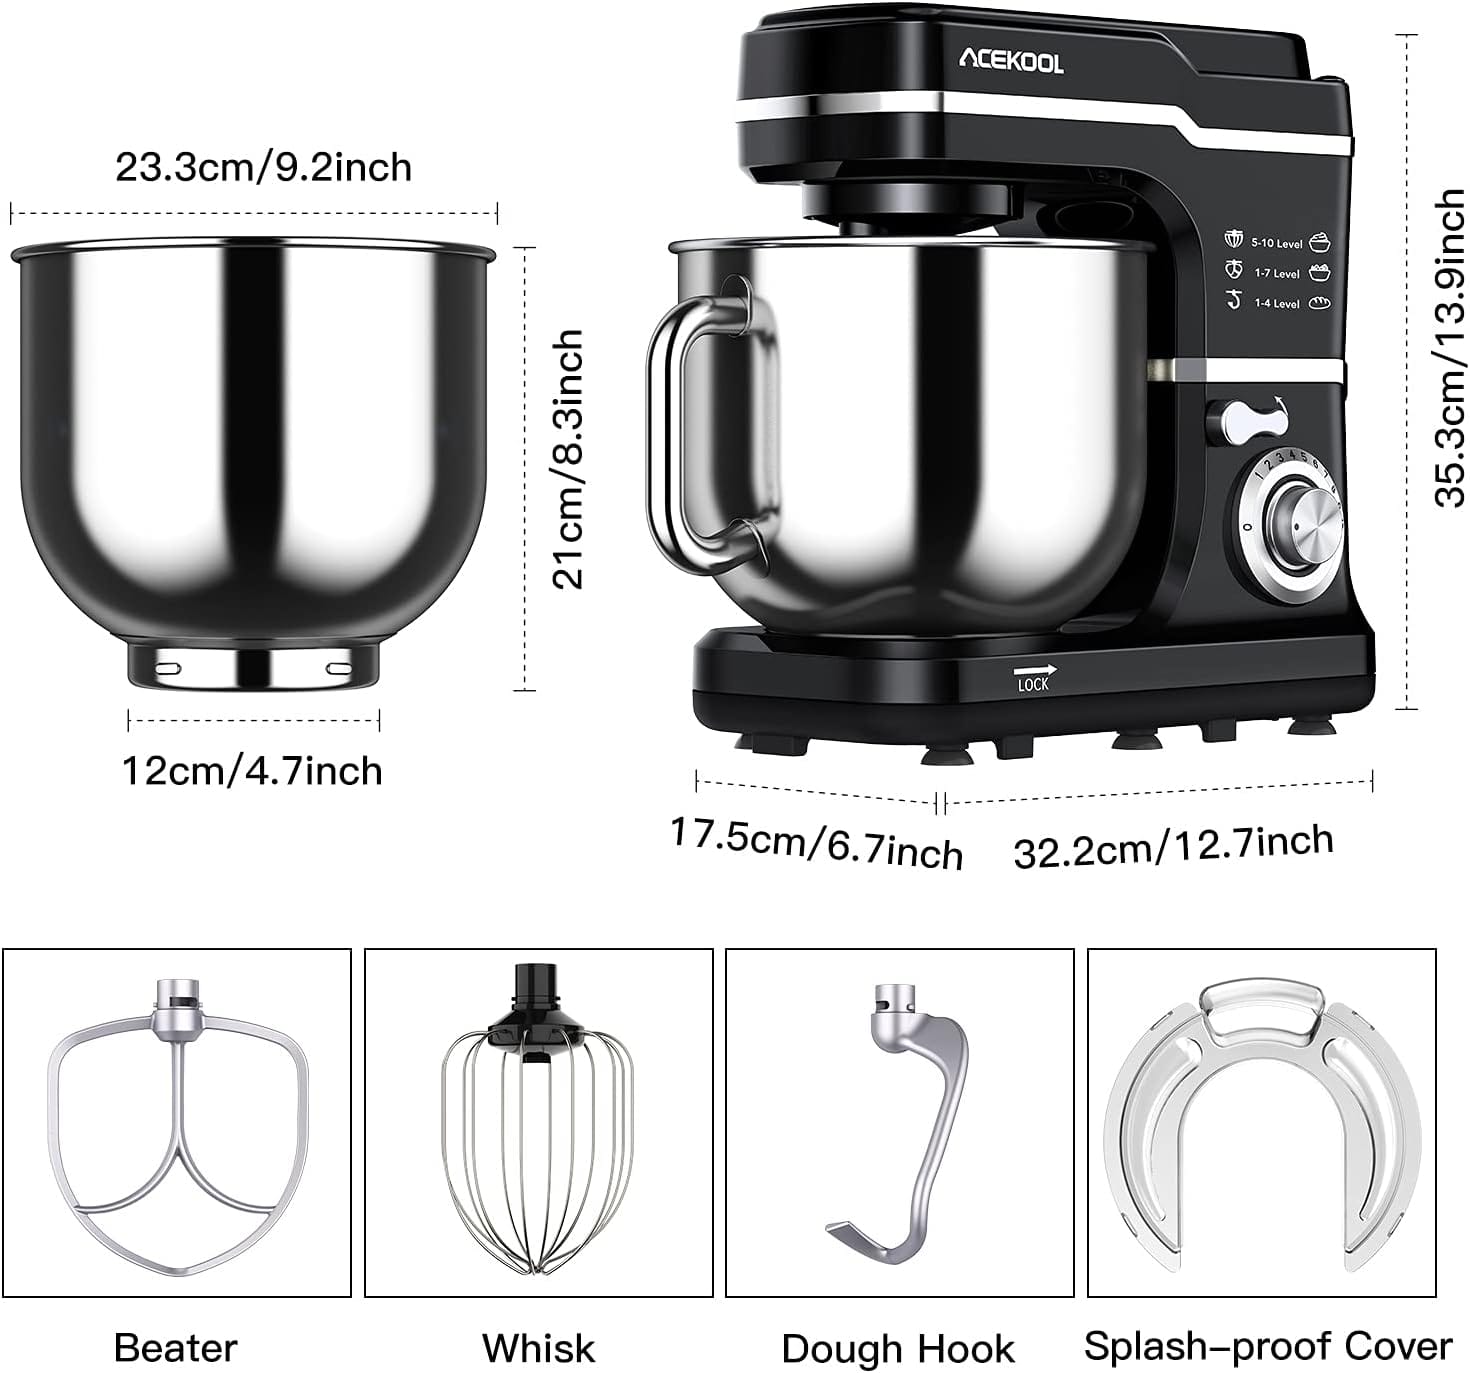 Stand Mixer, 7.5 Qt. 660W 10-Speed Electric Kitchen Mixer with Dishwasher-Safe Dough Hooks, Beaters, Wire Whip  S plash Guard for Most Home Cooks